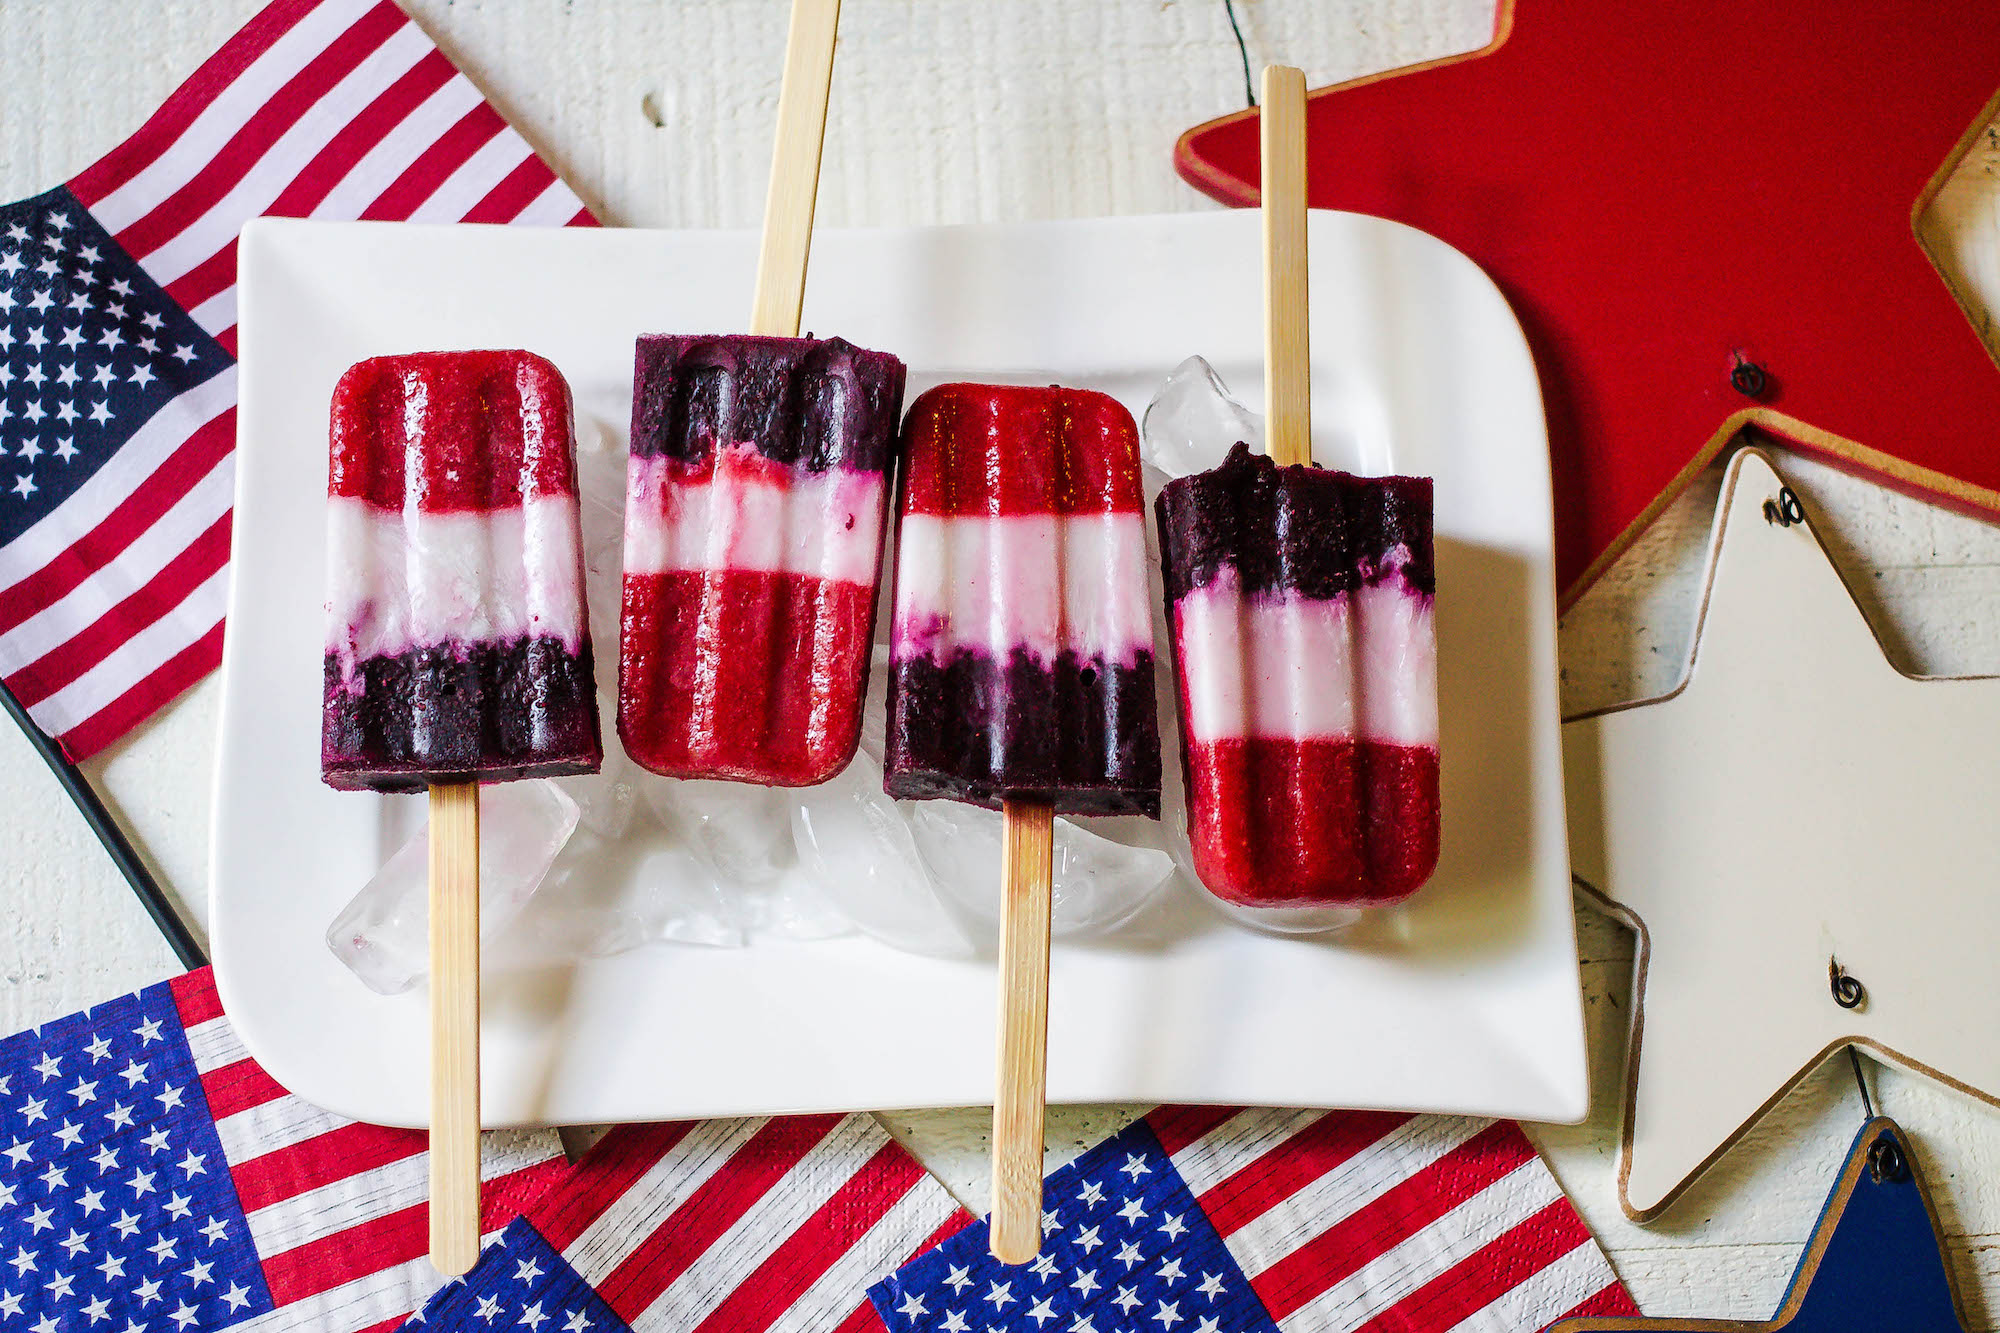 Red White and Blue Popsicles (Healthy Homemade Popsicles) Recipe